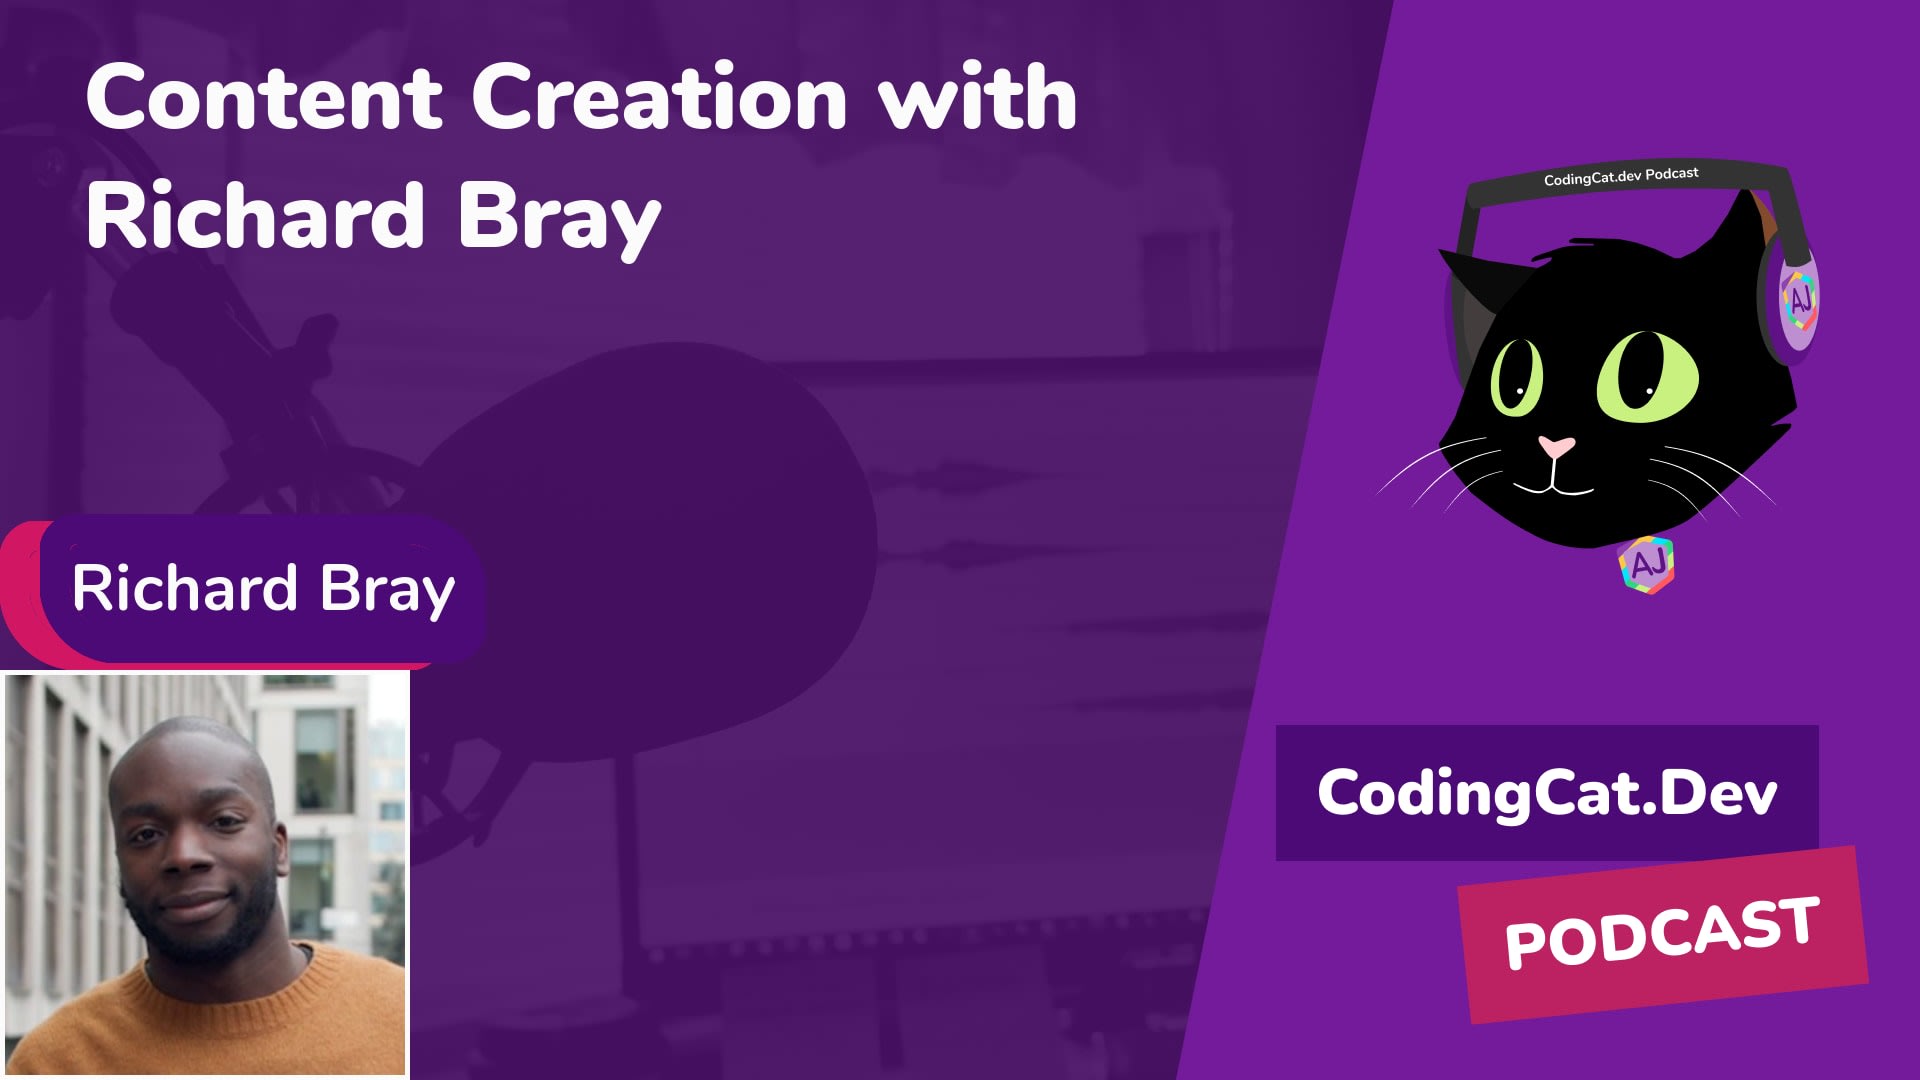 3.1 - Content Creation with Richard Bray